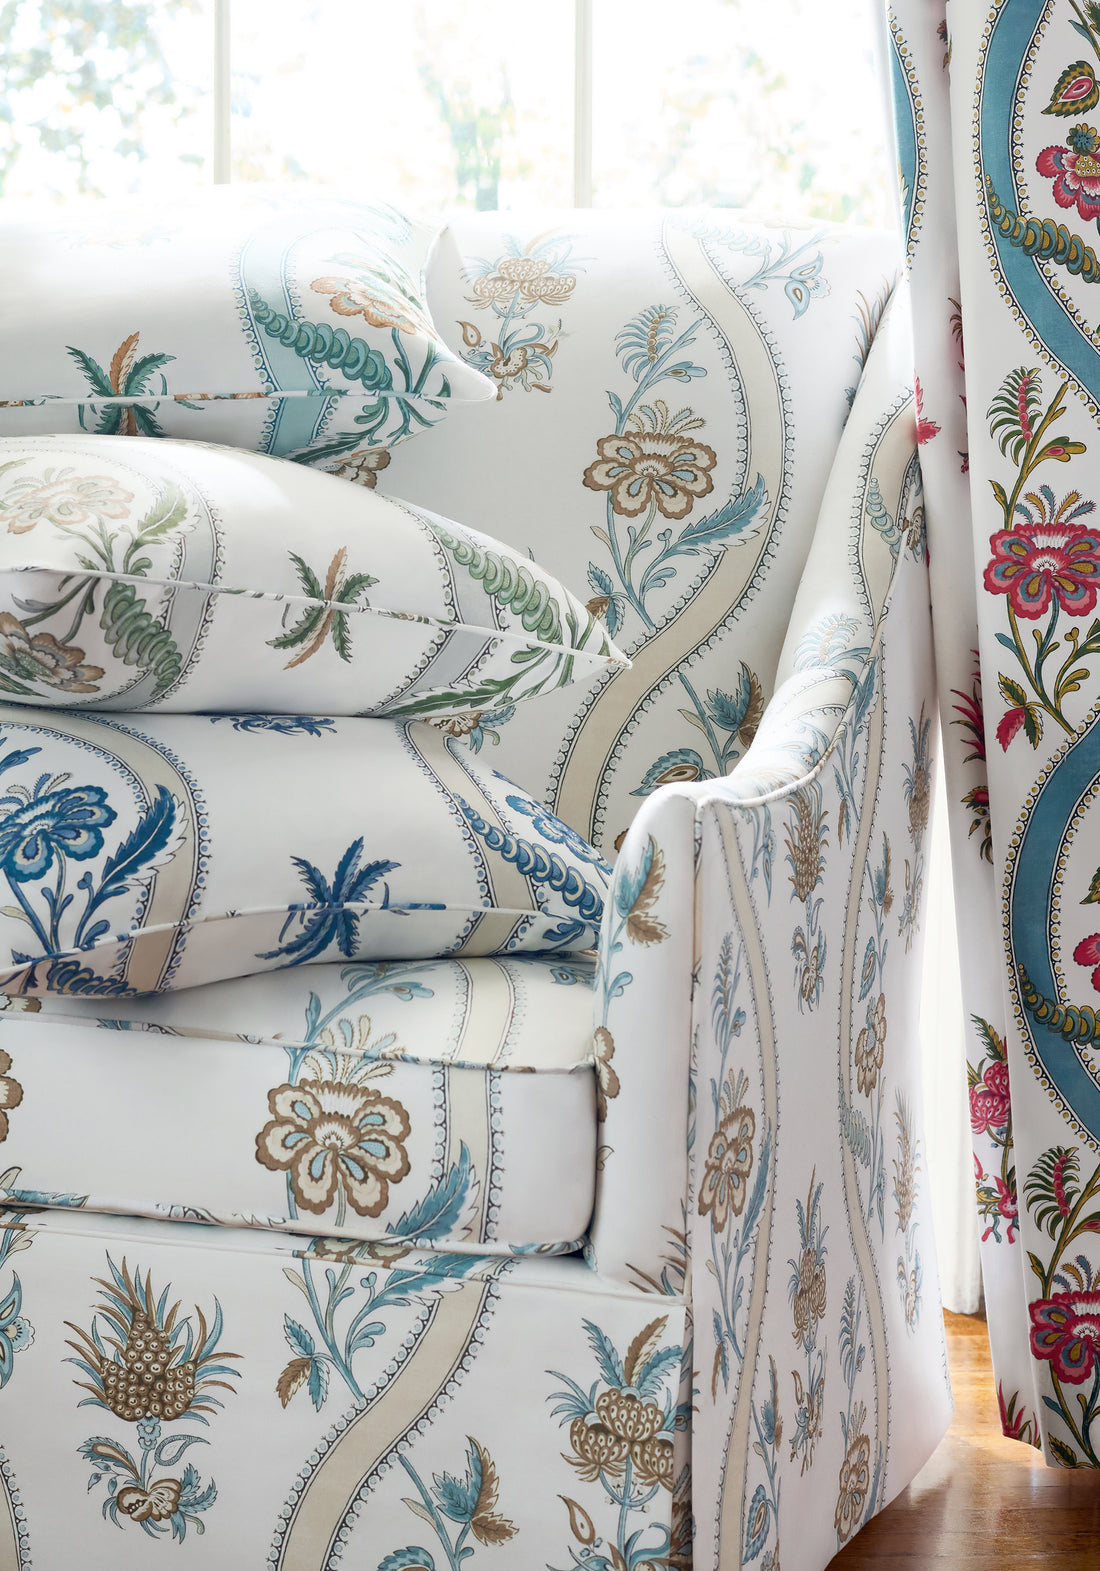 Pillow featuring Ribbon Floral fabric in blue and white color - pattern number F936423 - by Thibaut in the Indienne collection